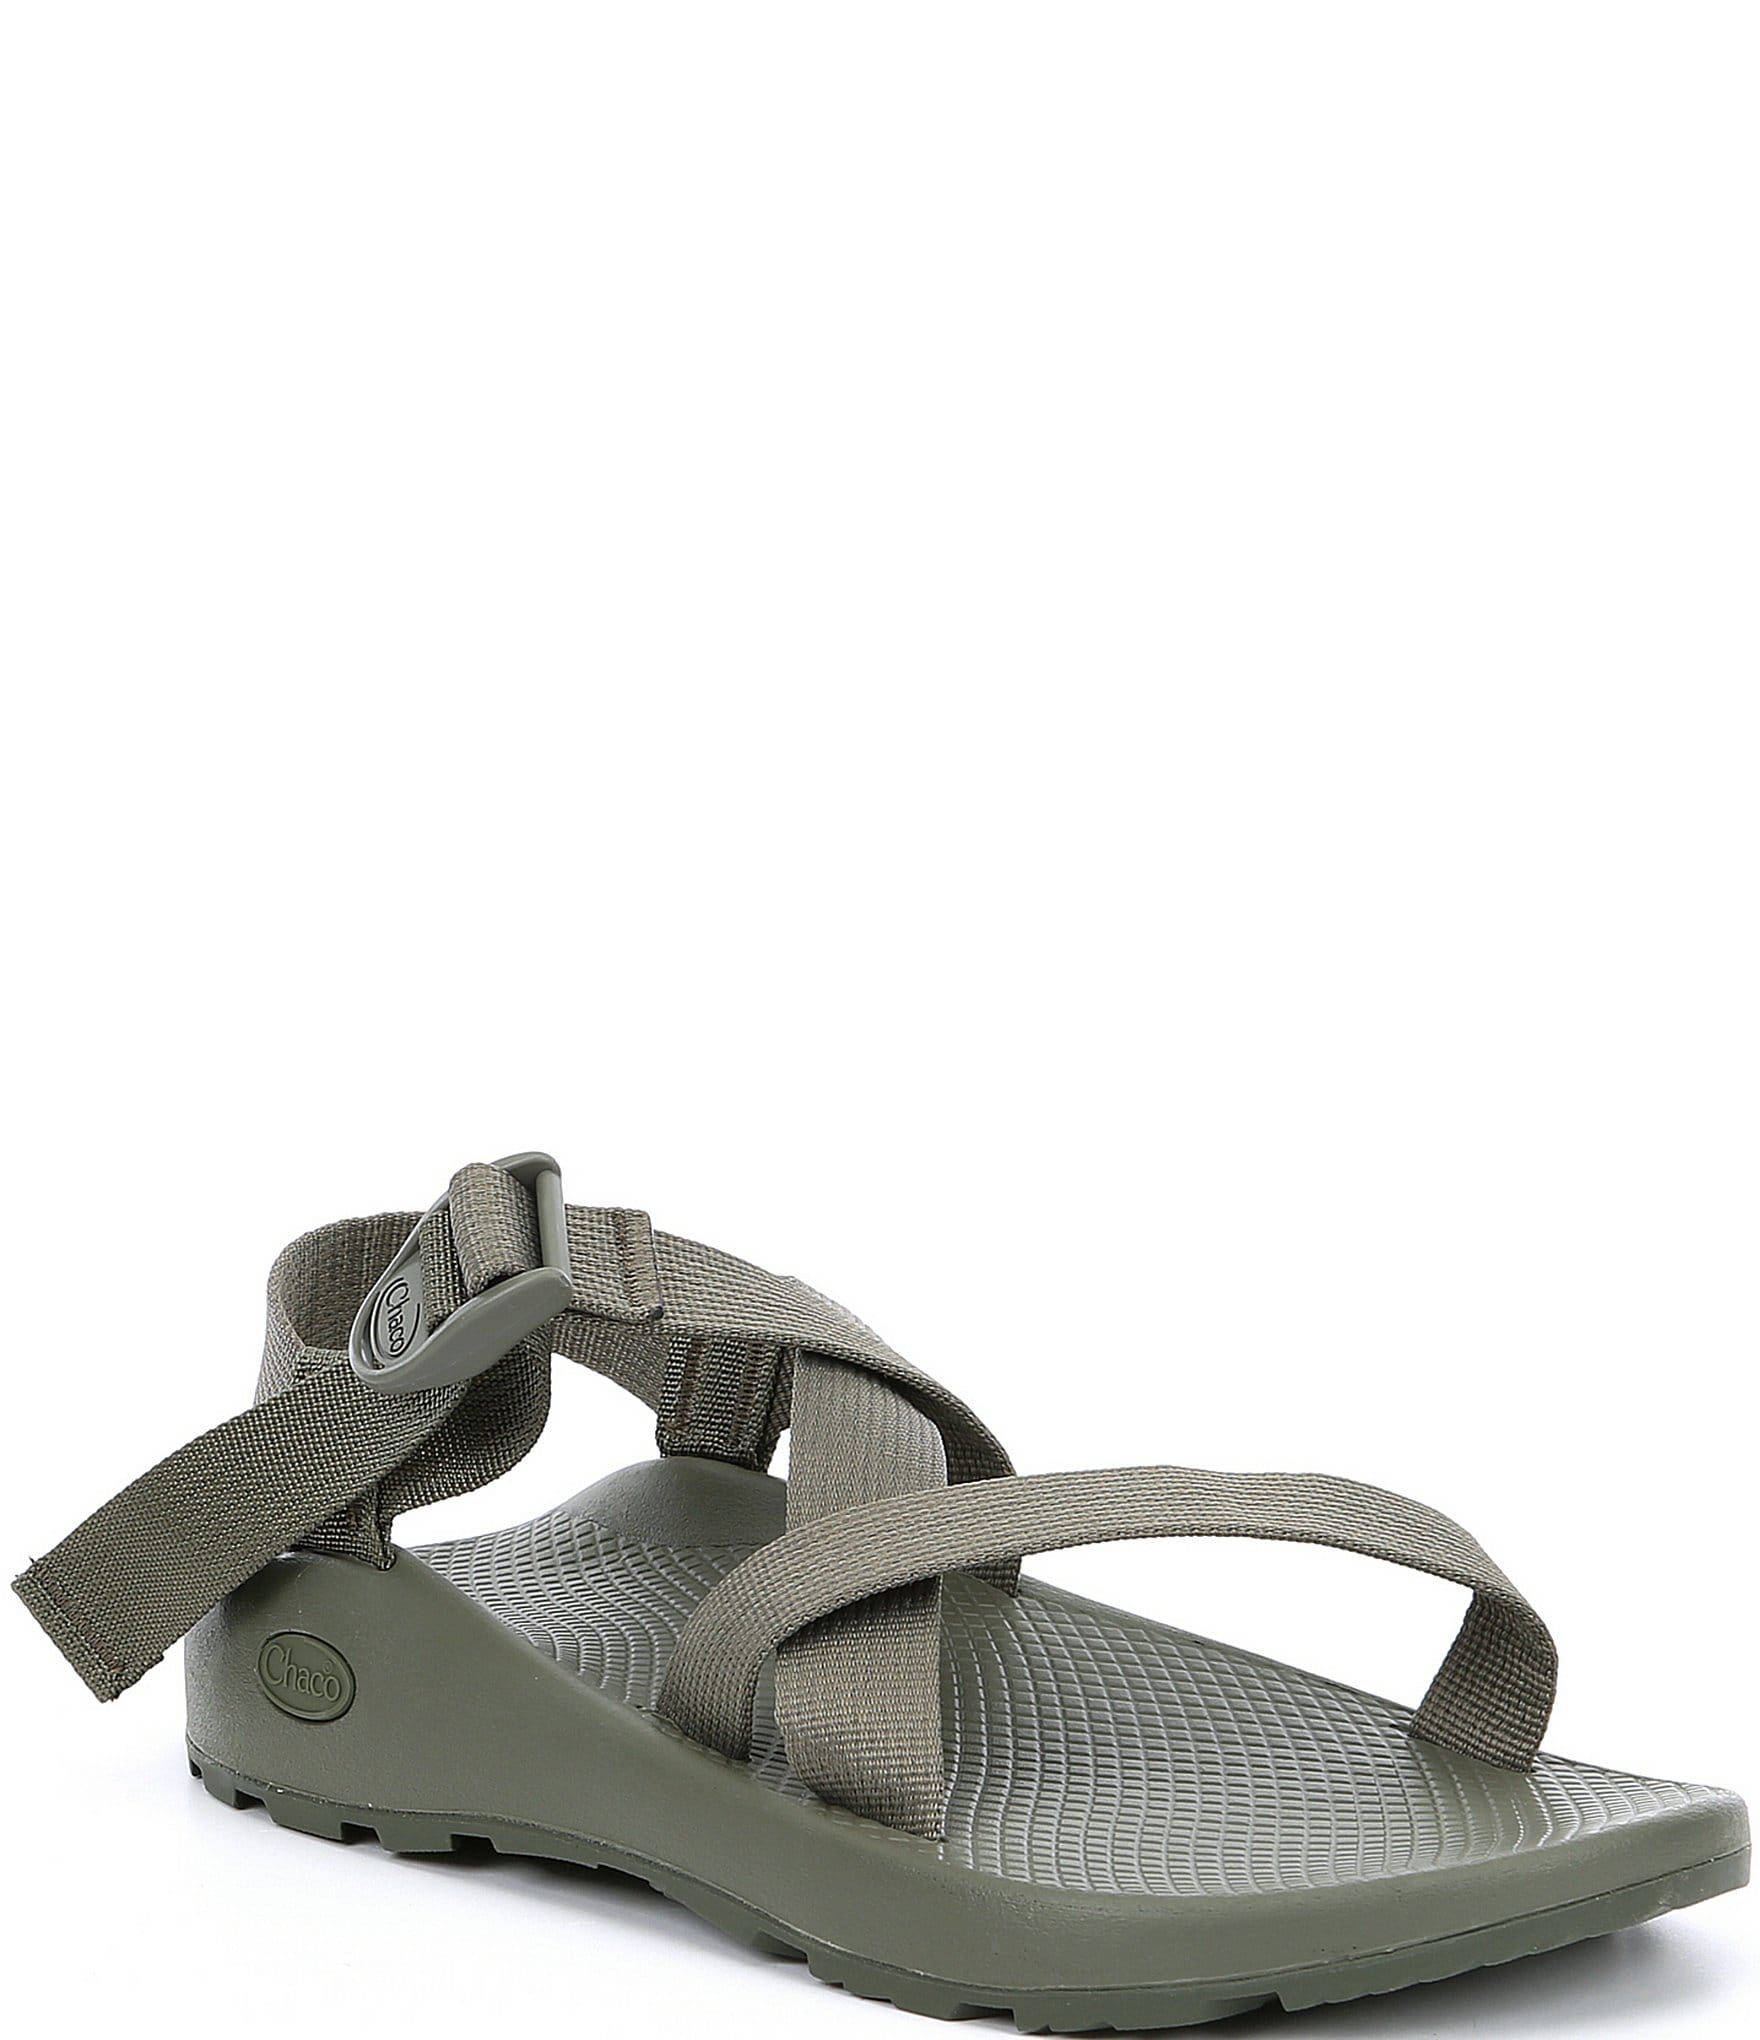 olive green chacos